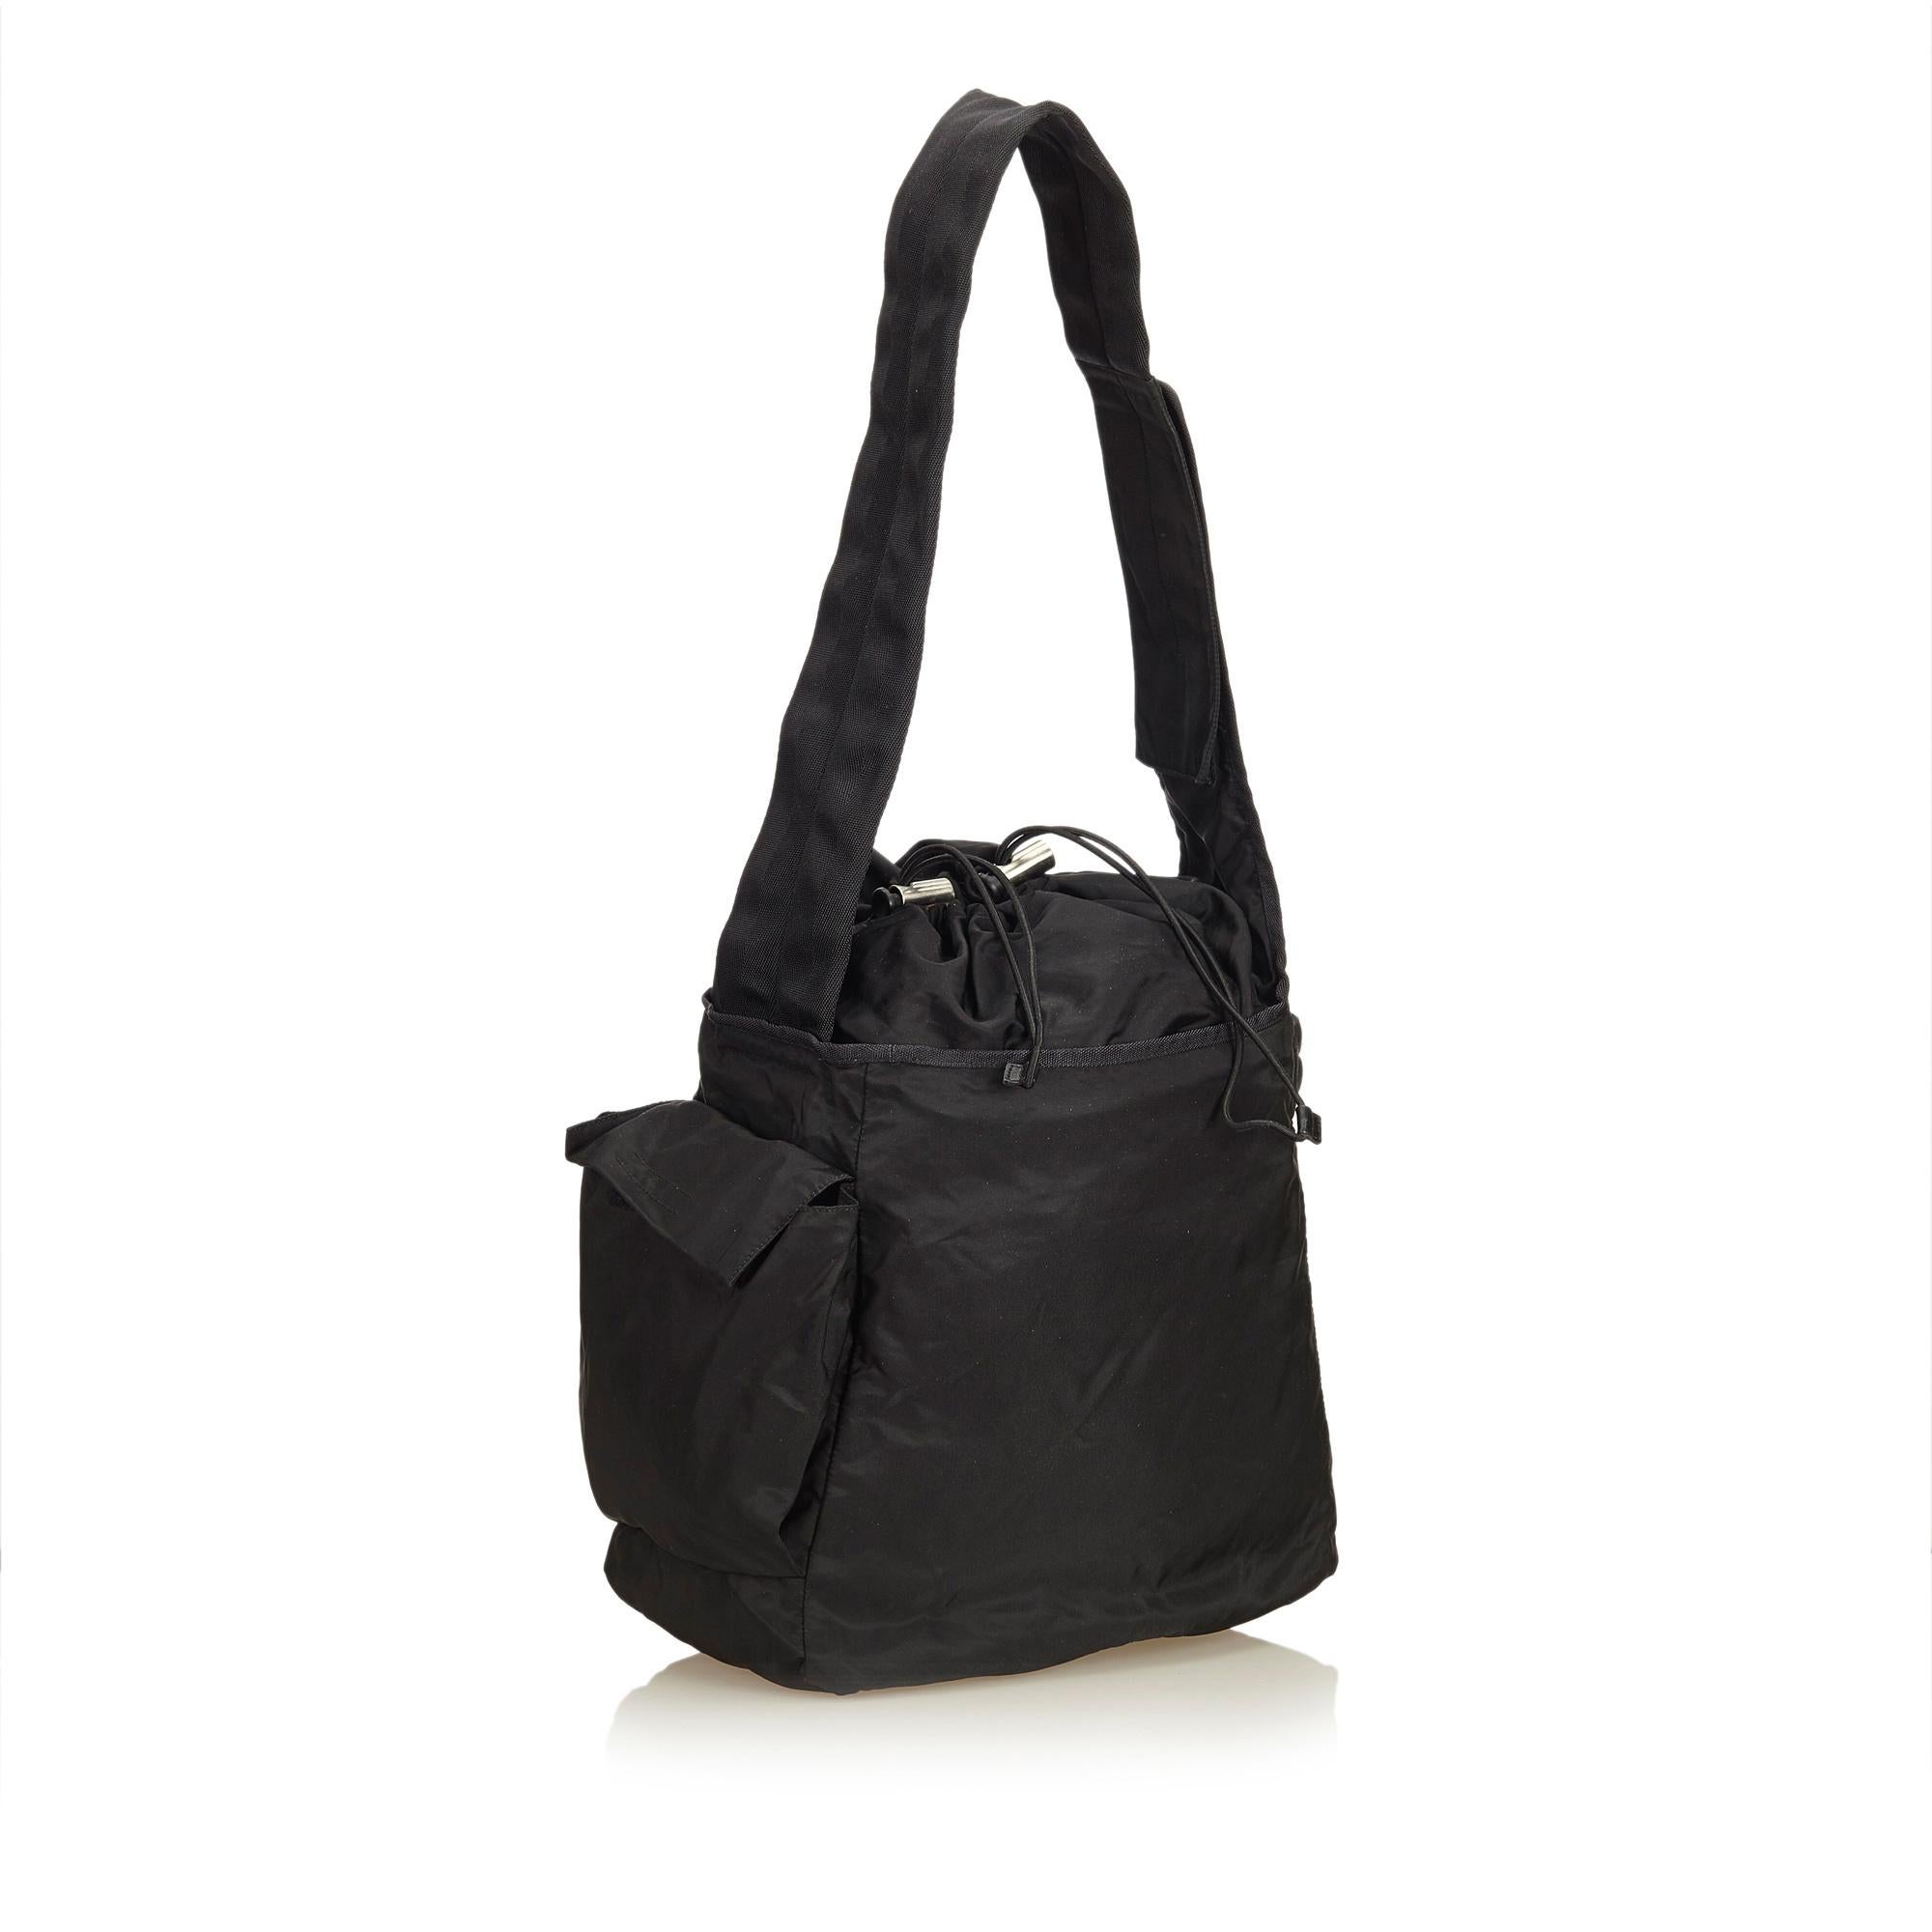 This shoulder bag features a nylon body, flat strap, drawstring closure, exterior flap and slip pockets and interior zip pocket. It carries as B+ condition rating.

Inclusions: 
This item does not come with inclusions.

Dimensions:
Length: 30.00